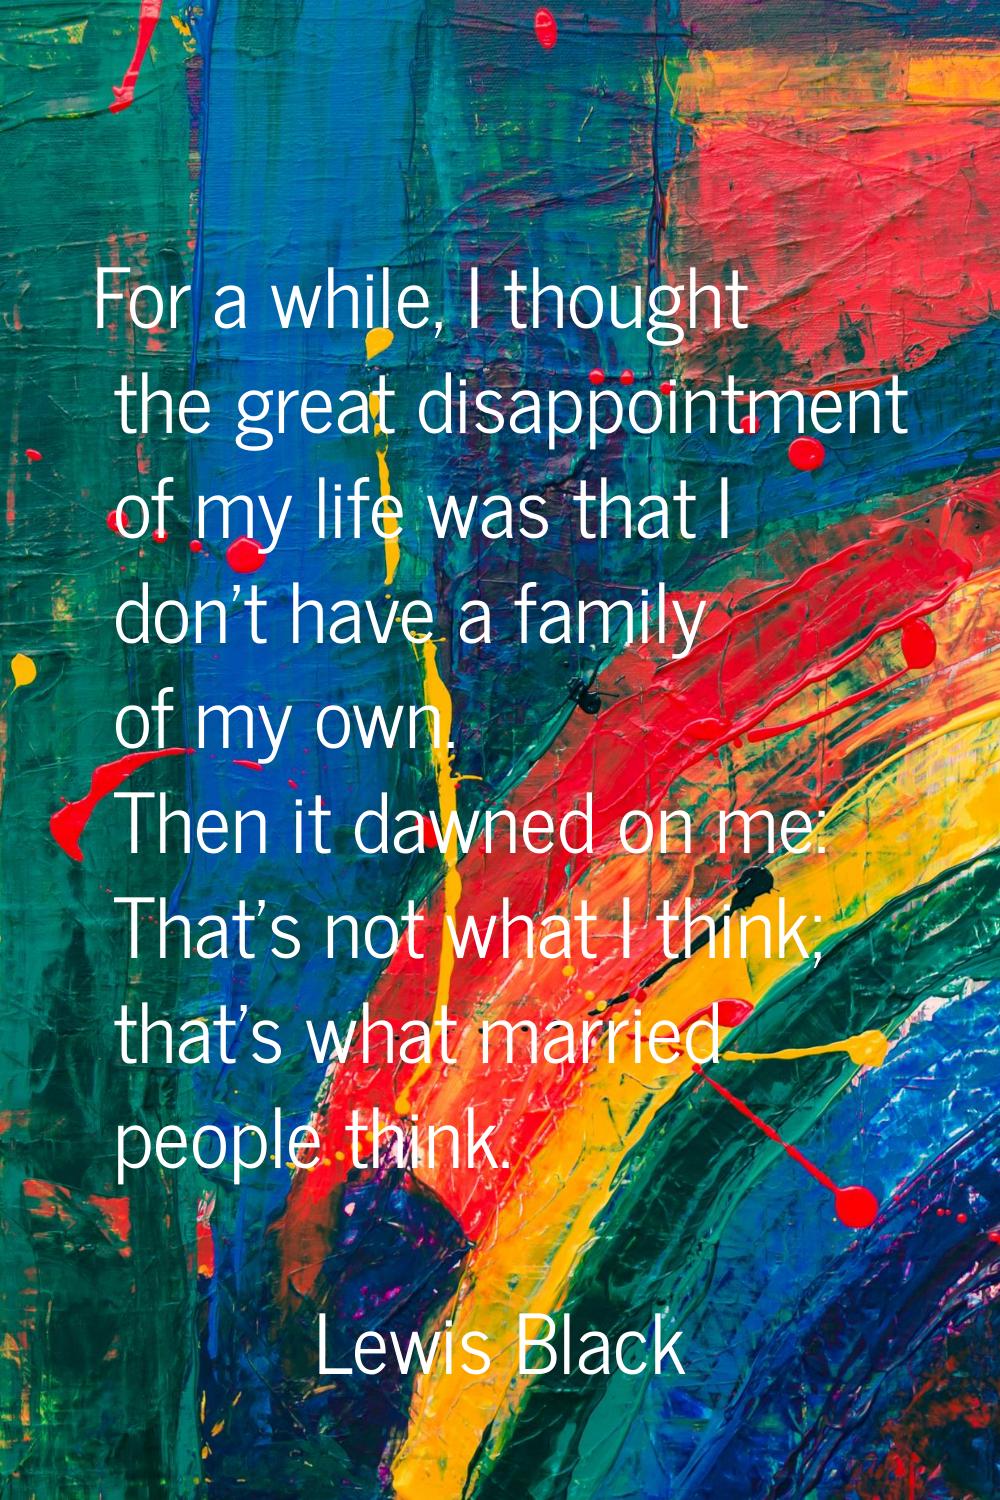 For a while, I thought the great disappointment of my life was that I don't have a family of my own